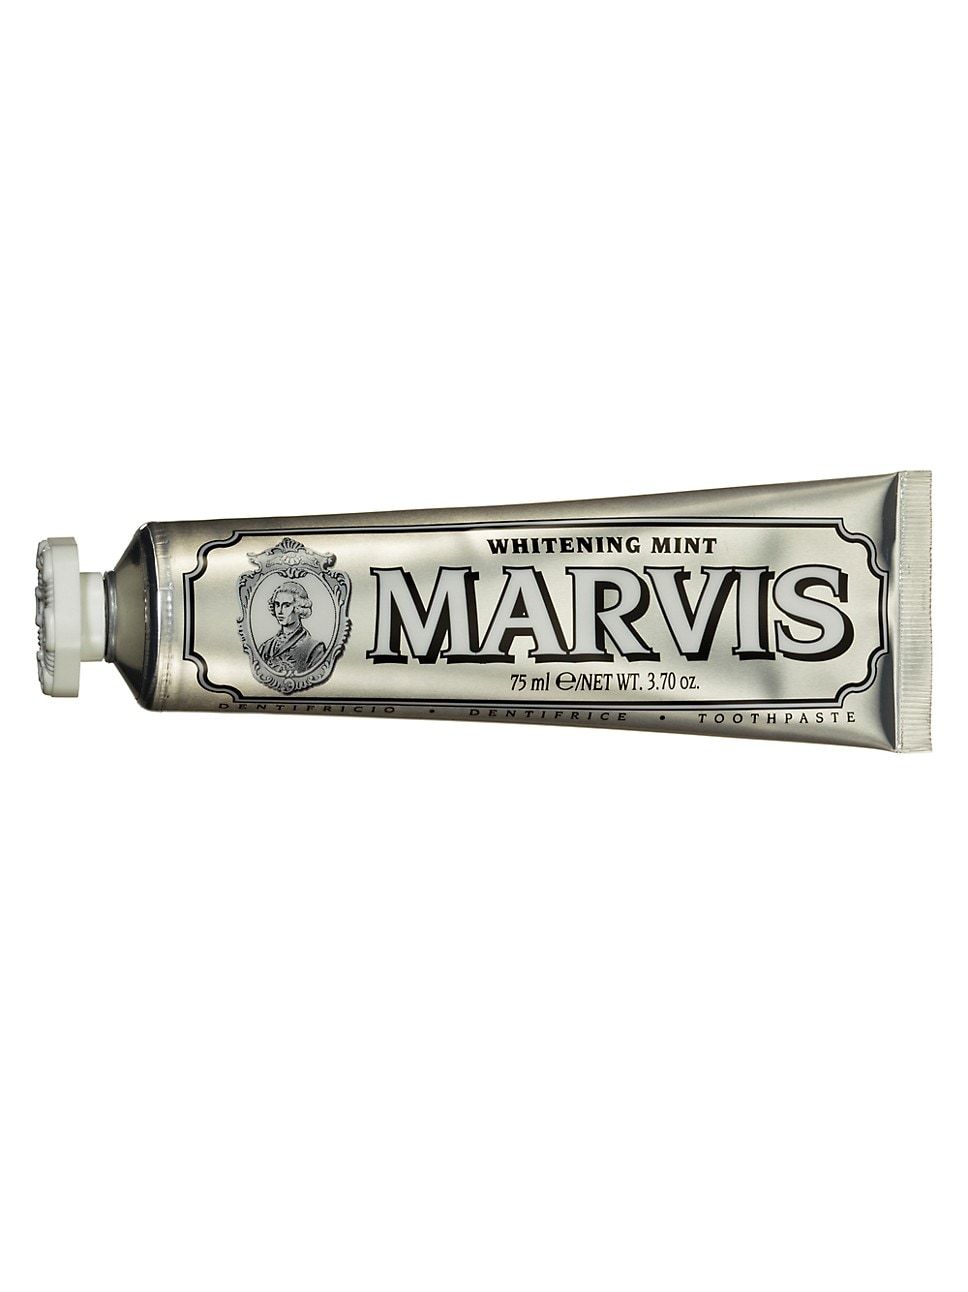 Marvis Whitening Mint Toothpaste | Saks Fifth Avenue